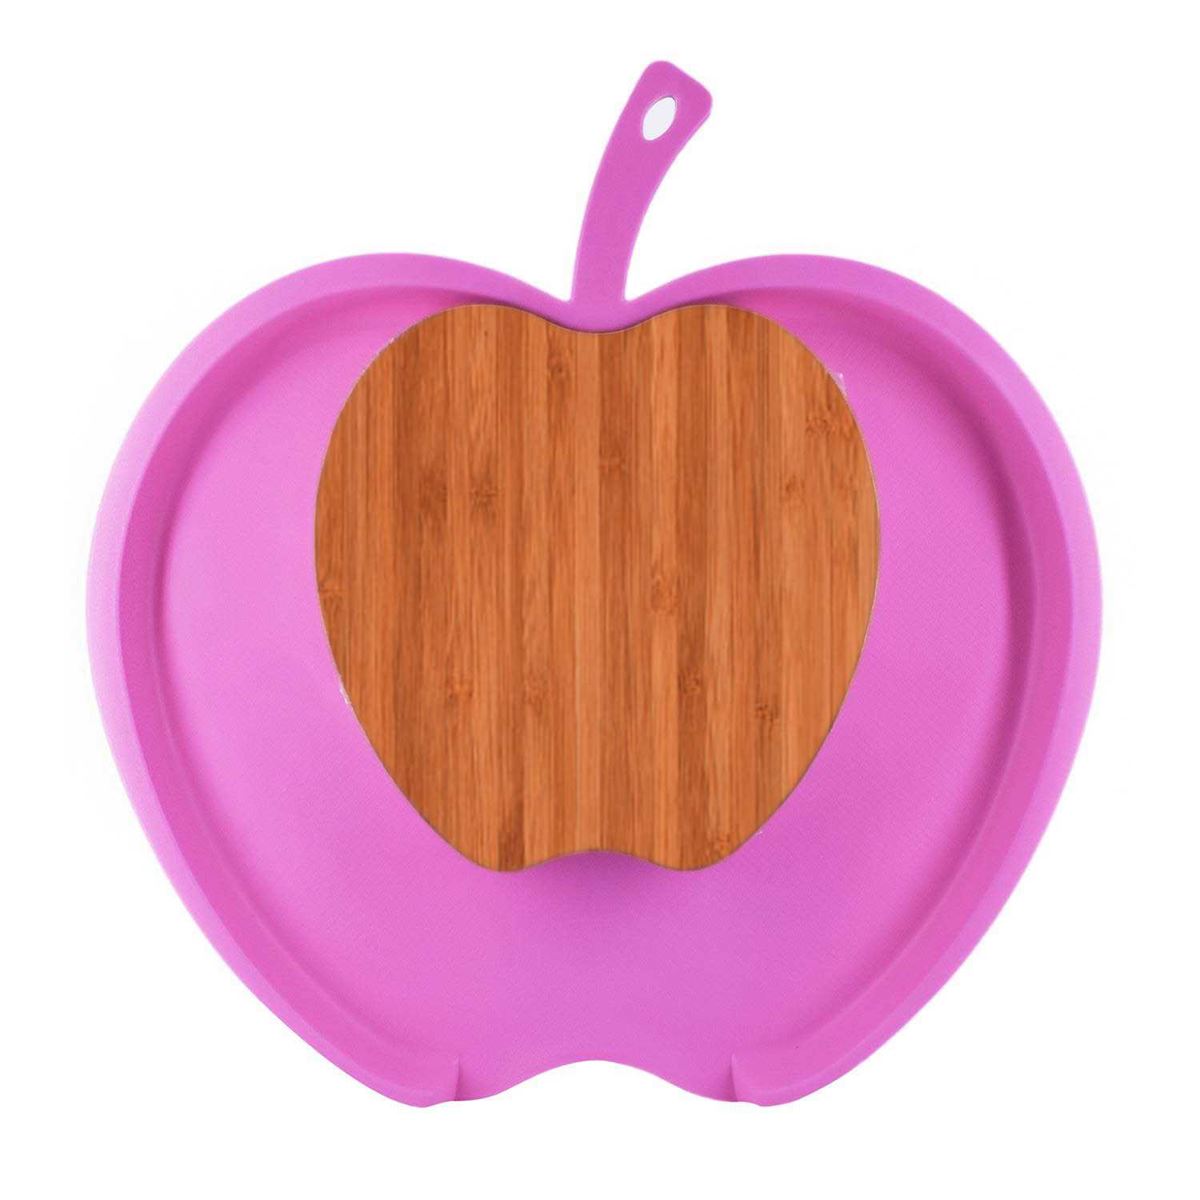 Wooden with Plastic Chopping Board for chop and drop (ZLFH01-10)